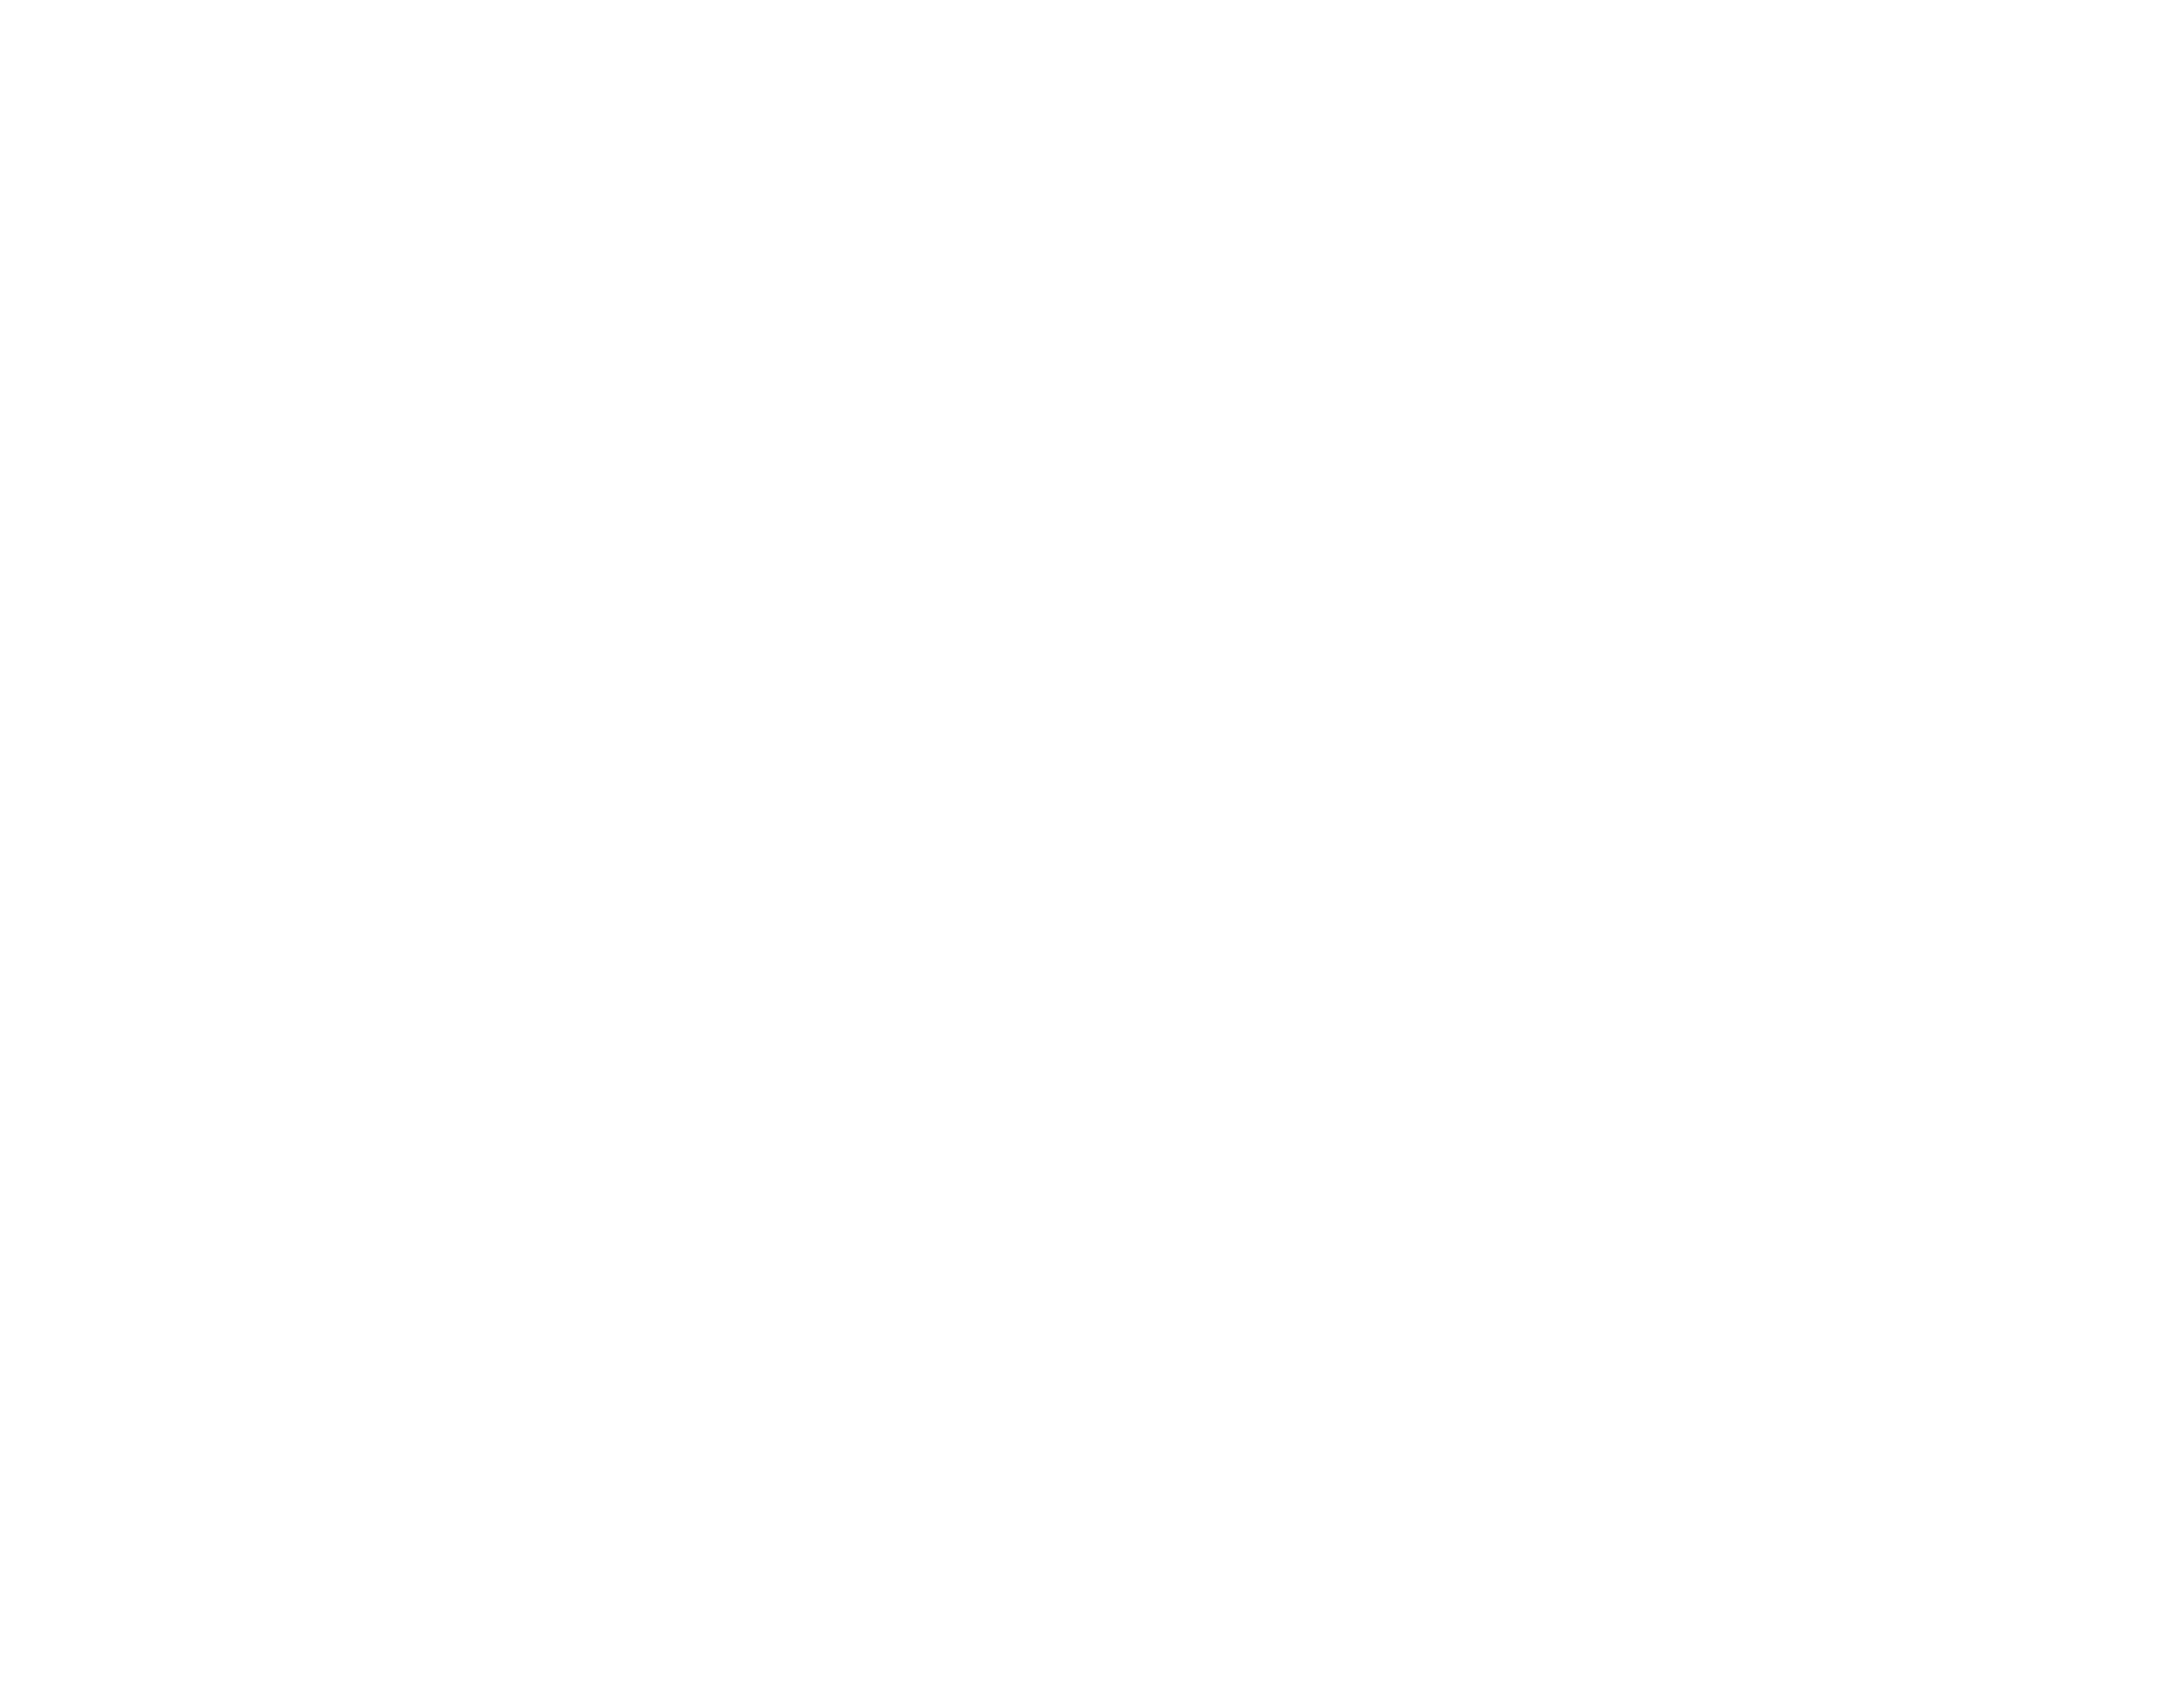 With the aim of helping to renew the debate on the school timetable, the Fundació Jaume Bofill and the Federació de Moviments de Renovació Pedagògica have compiled a document with proposals to define a new horizon of school hours for the country, reflecting the educational and social challenges of today.